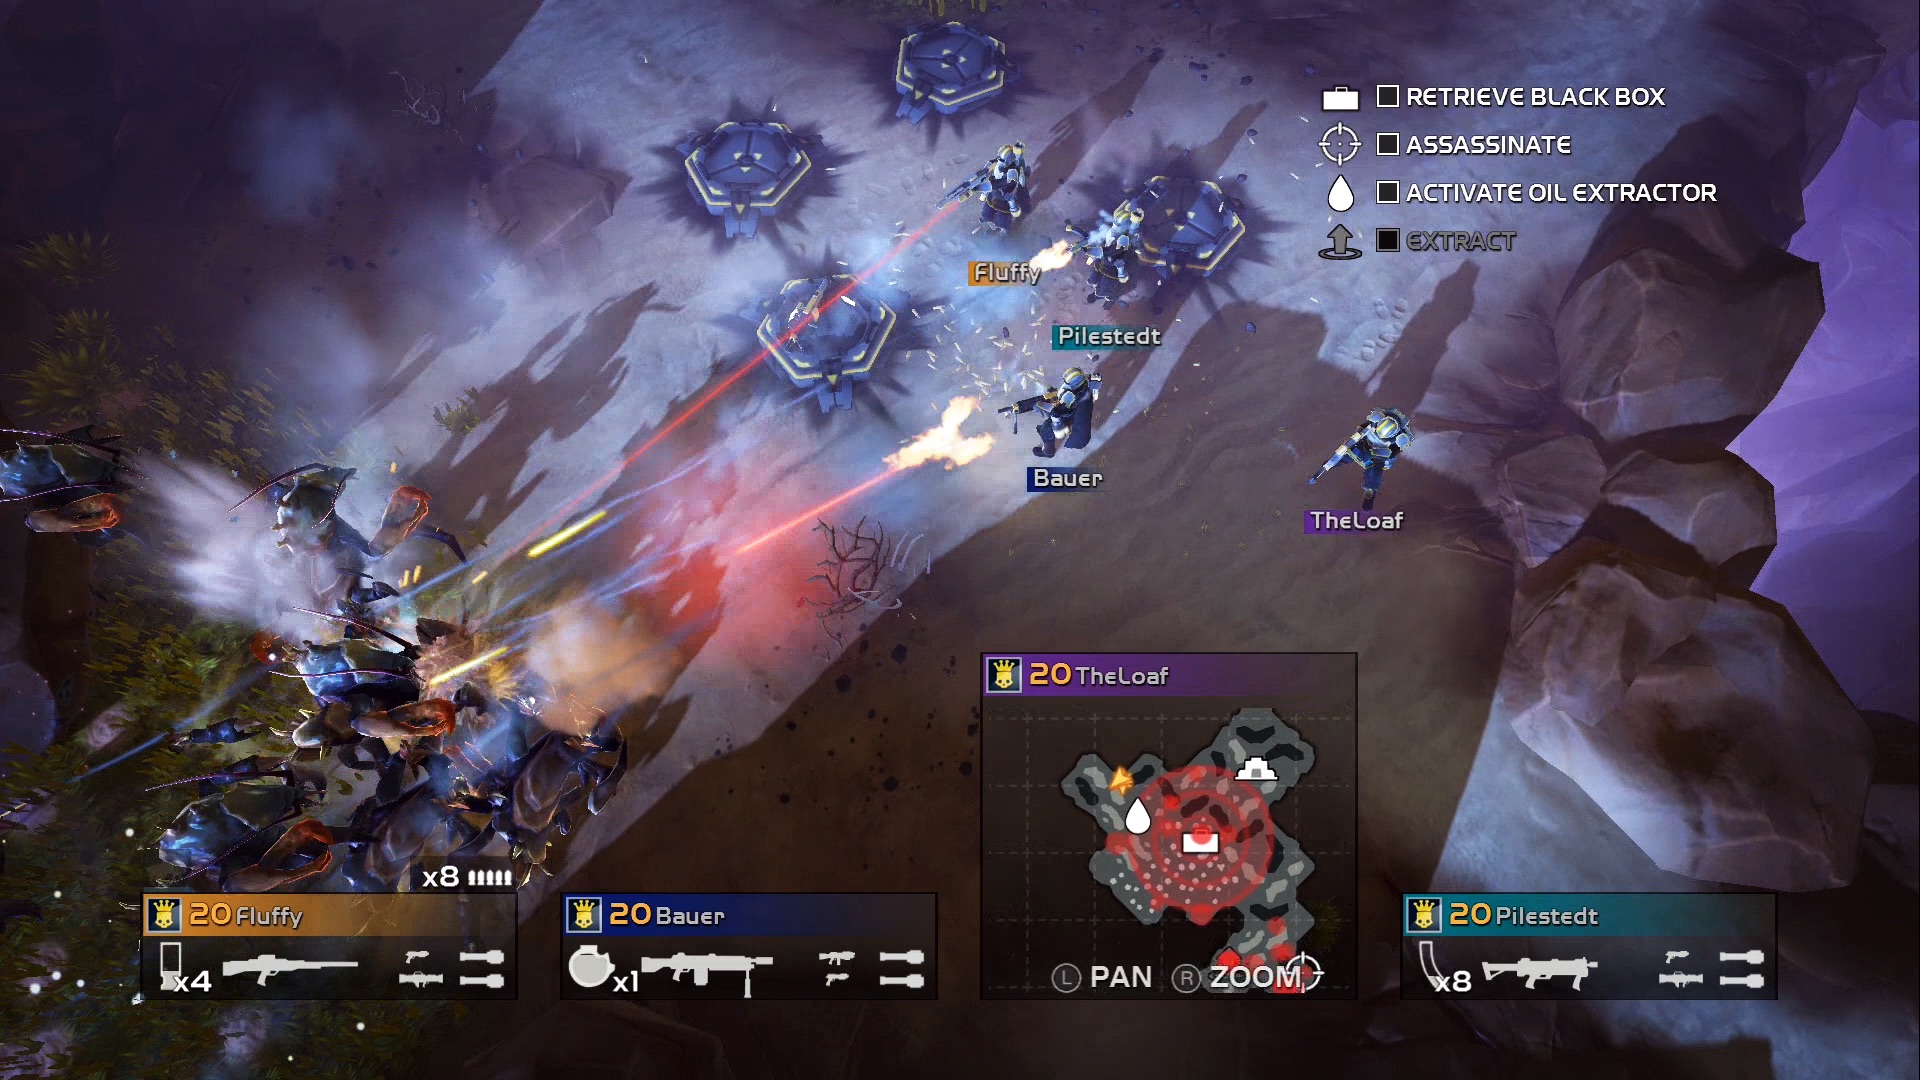 helldivers how to make 2 player